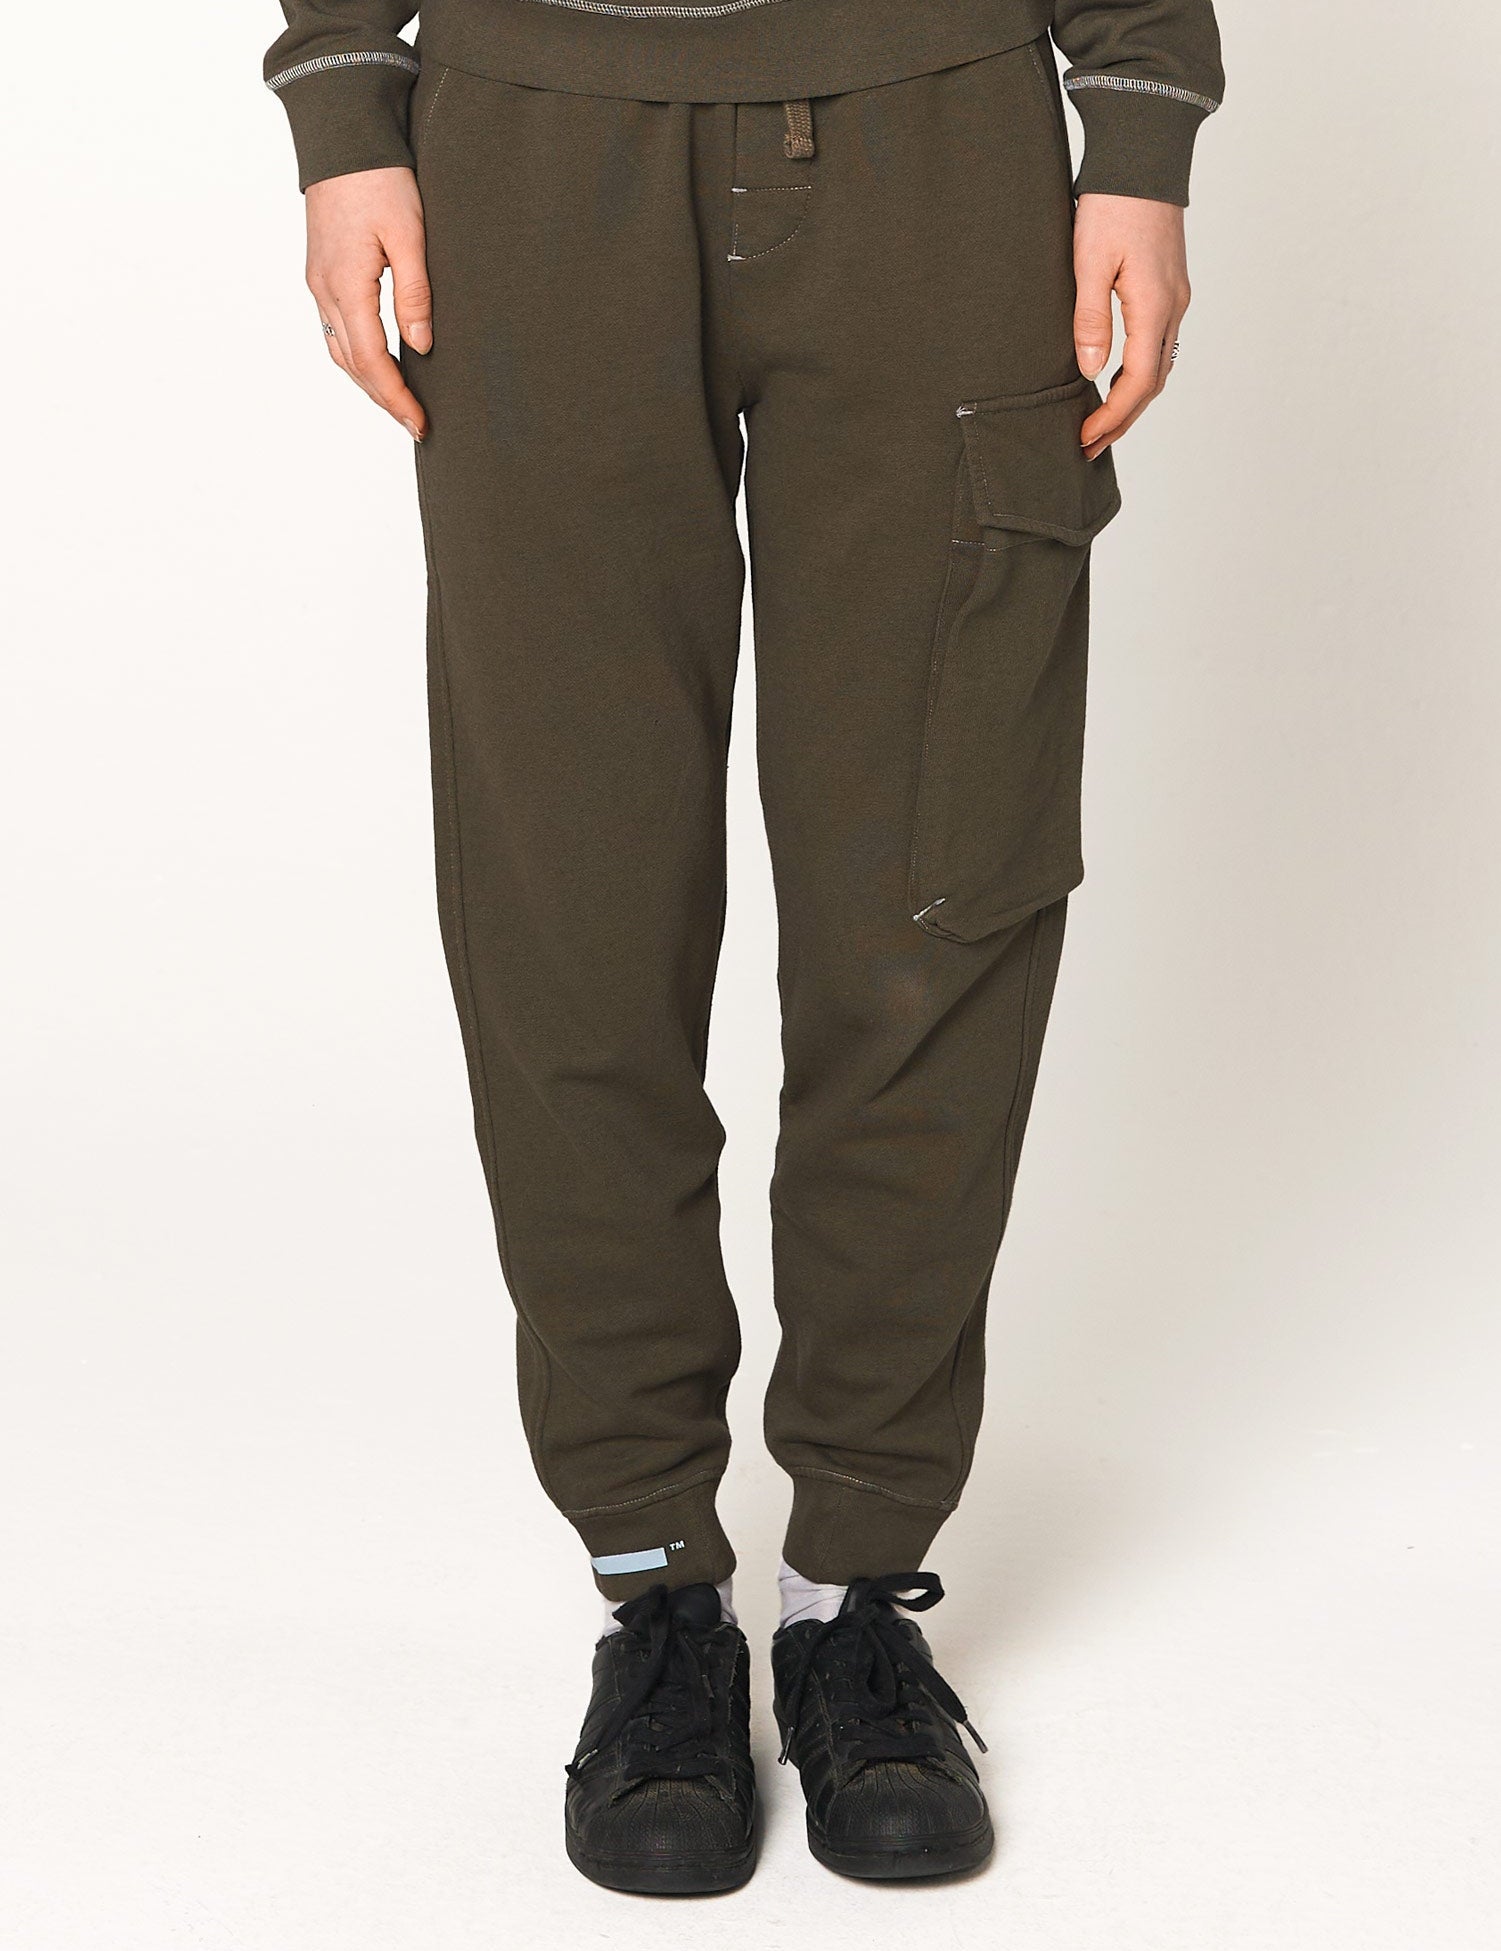 ITEM No. 13 – Track Pant Olive Overdyed - Standard Project